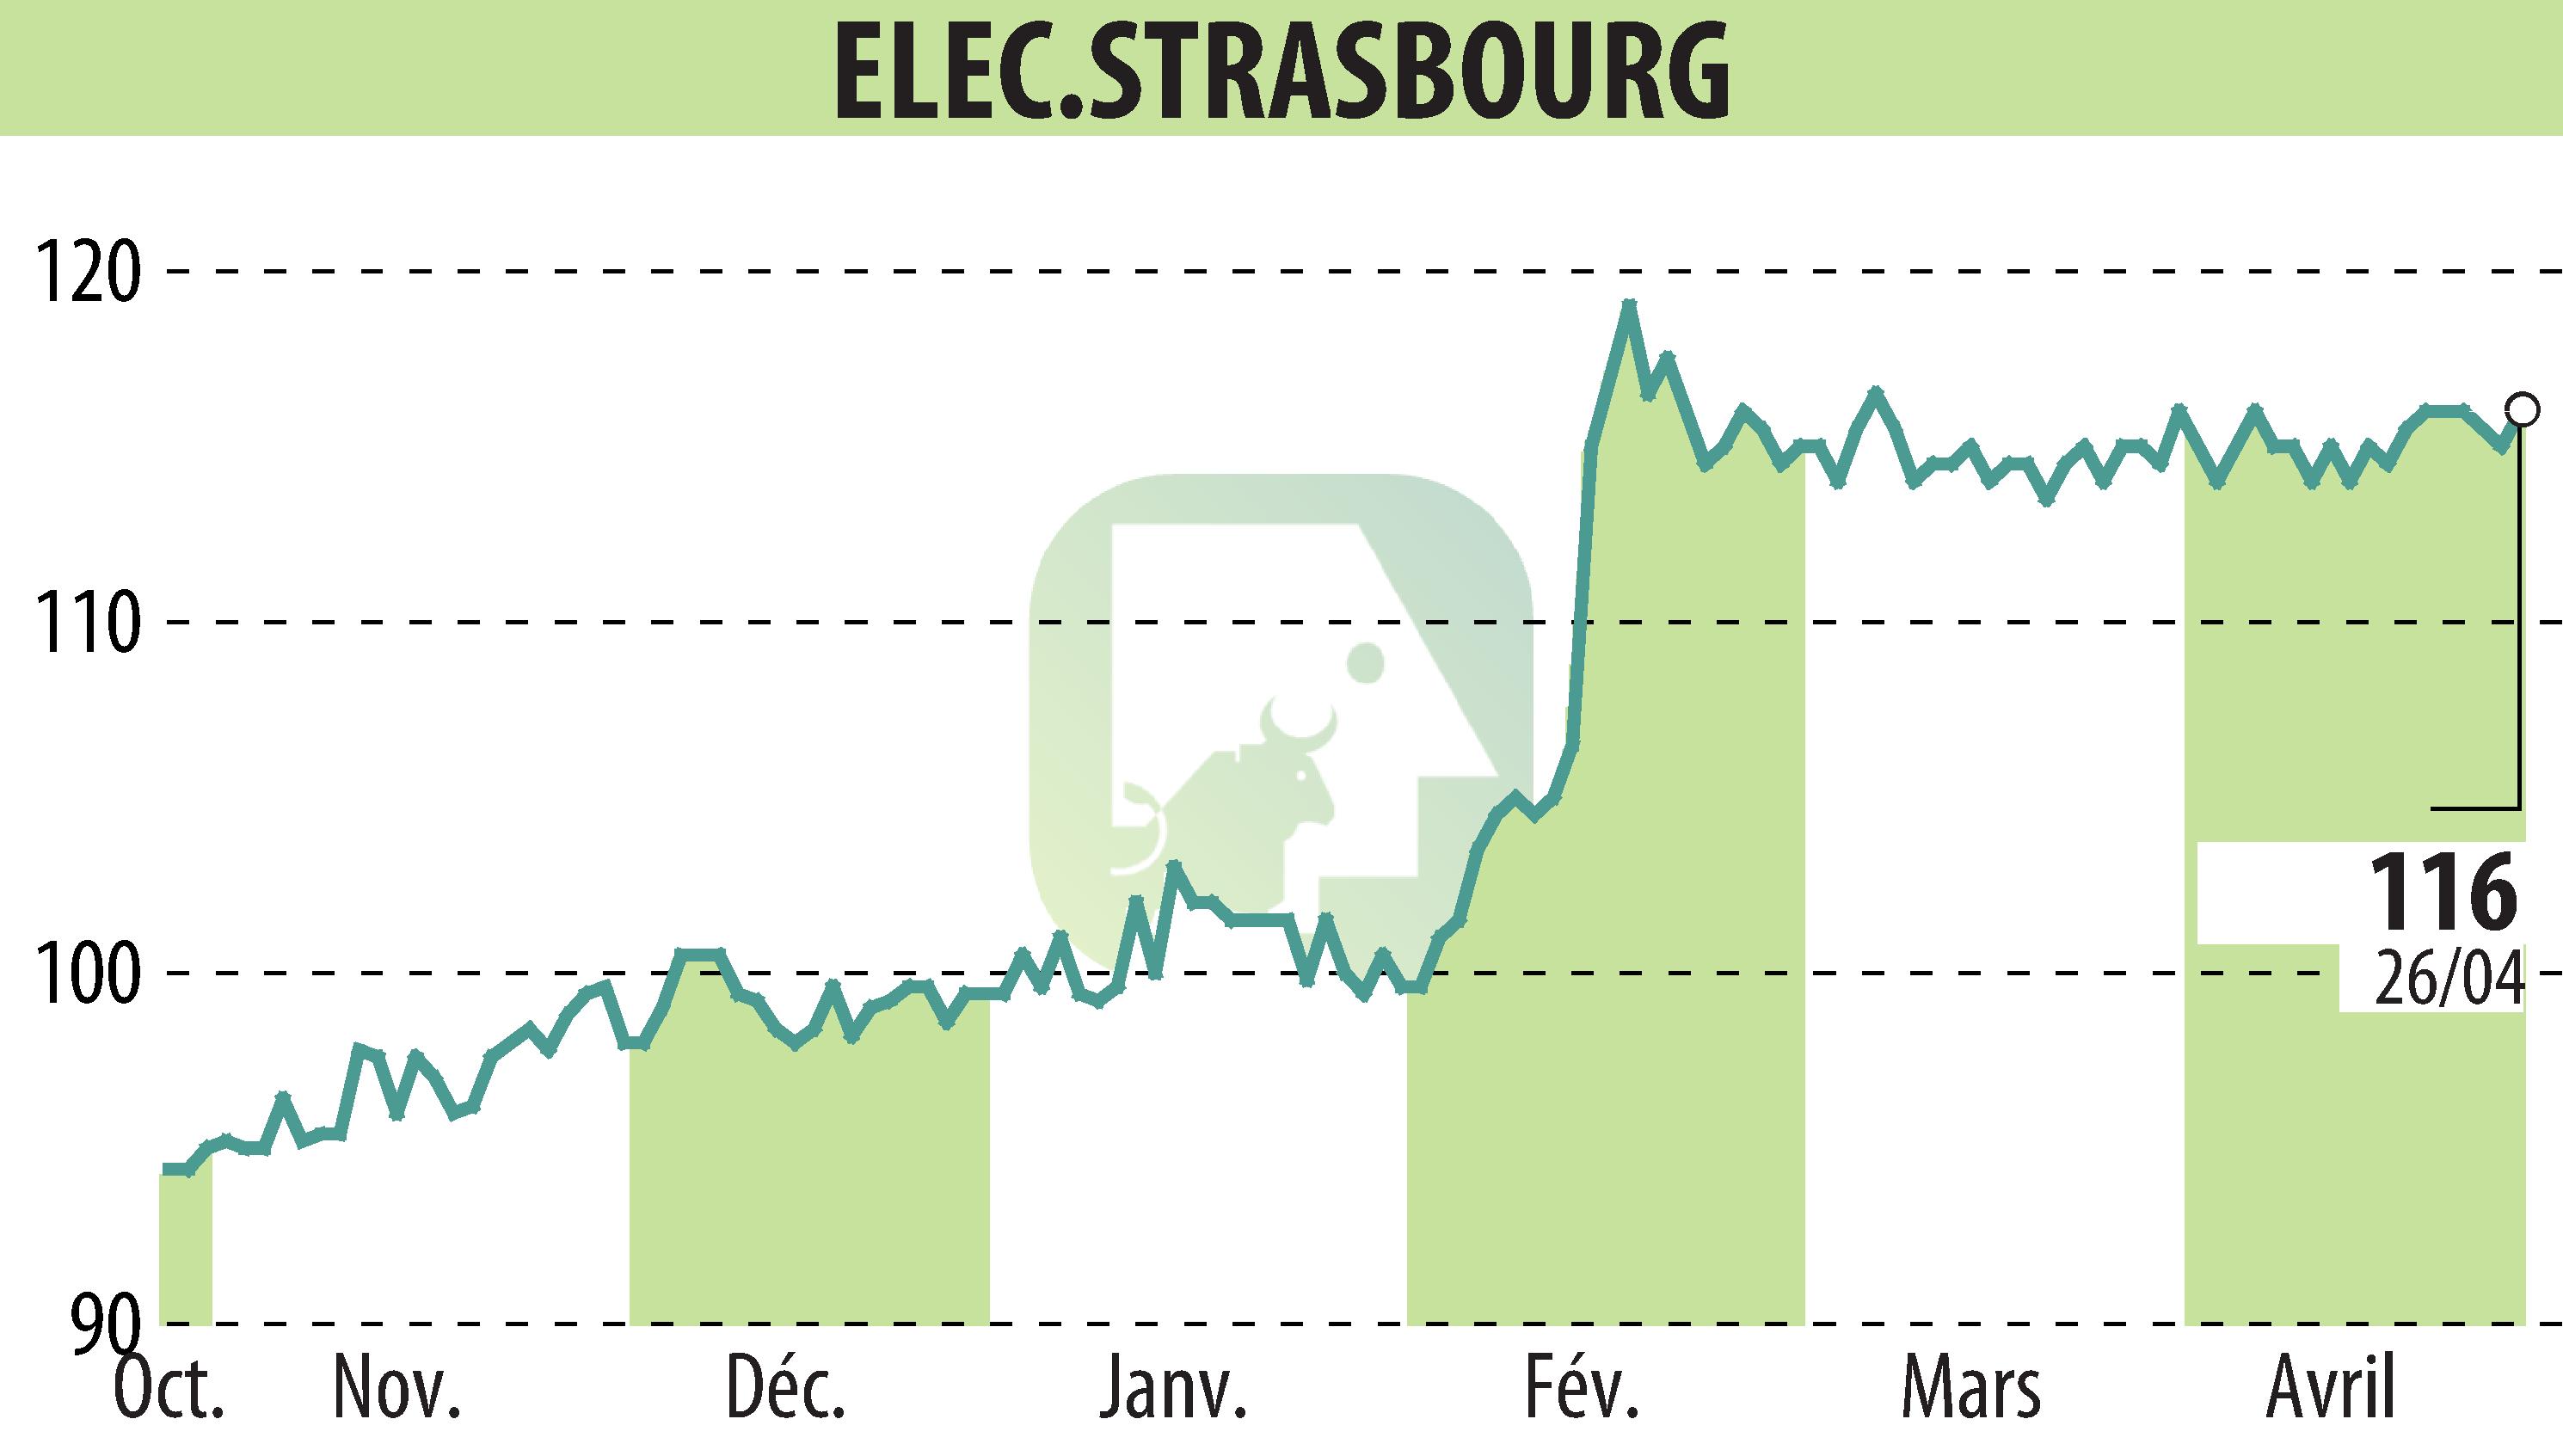 Stock price chart of ELECTRICITE DE STRASBOURG (EPA:ELEC) showing fluctuations.